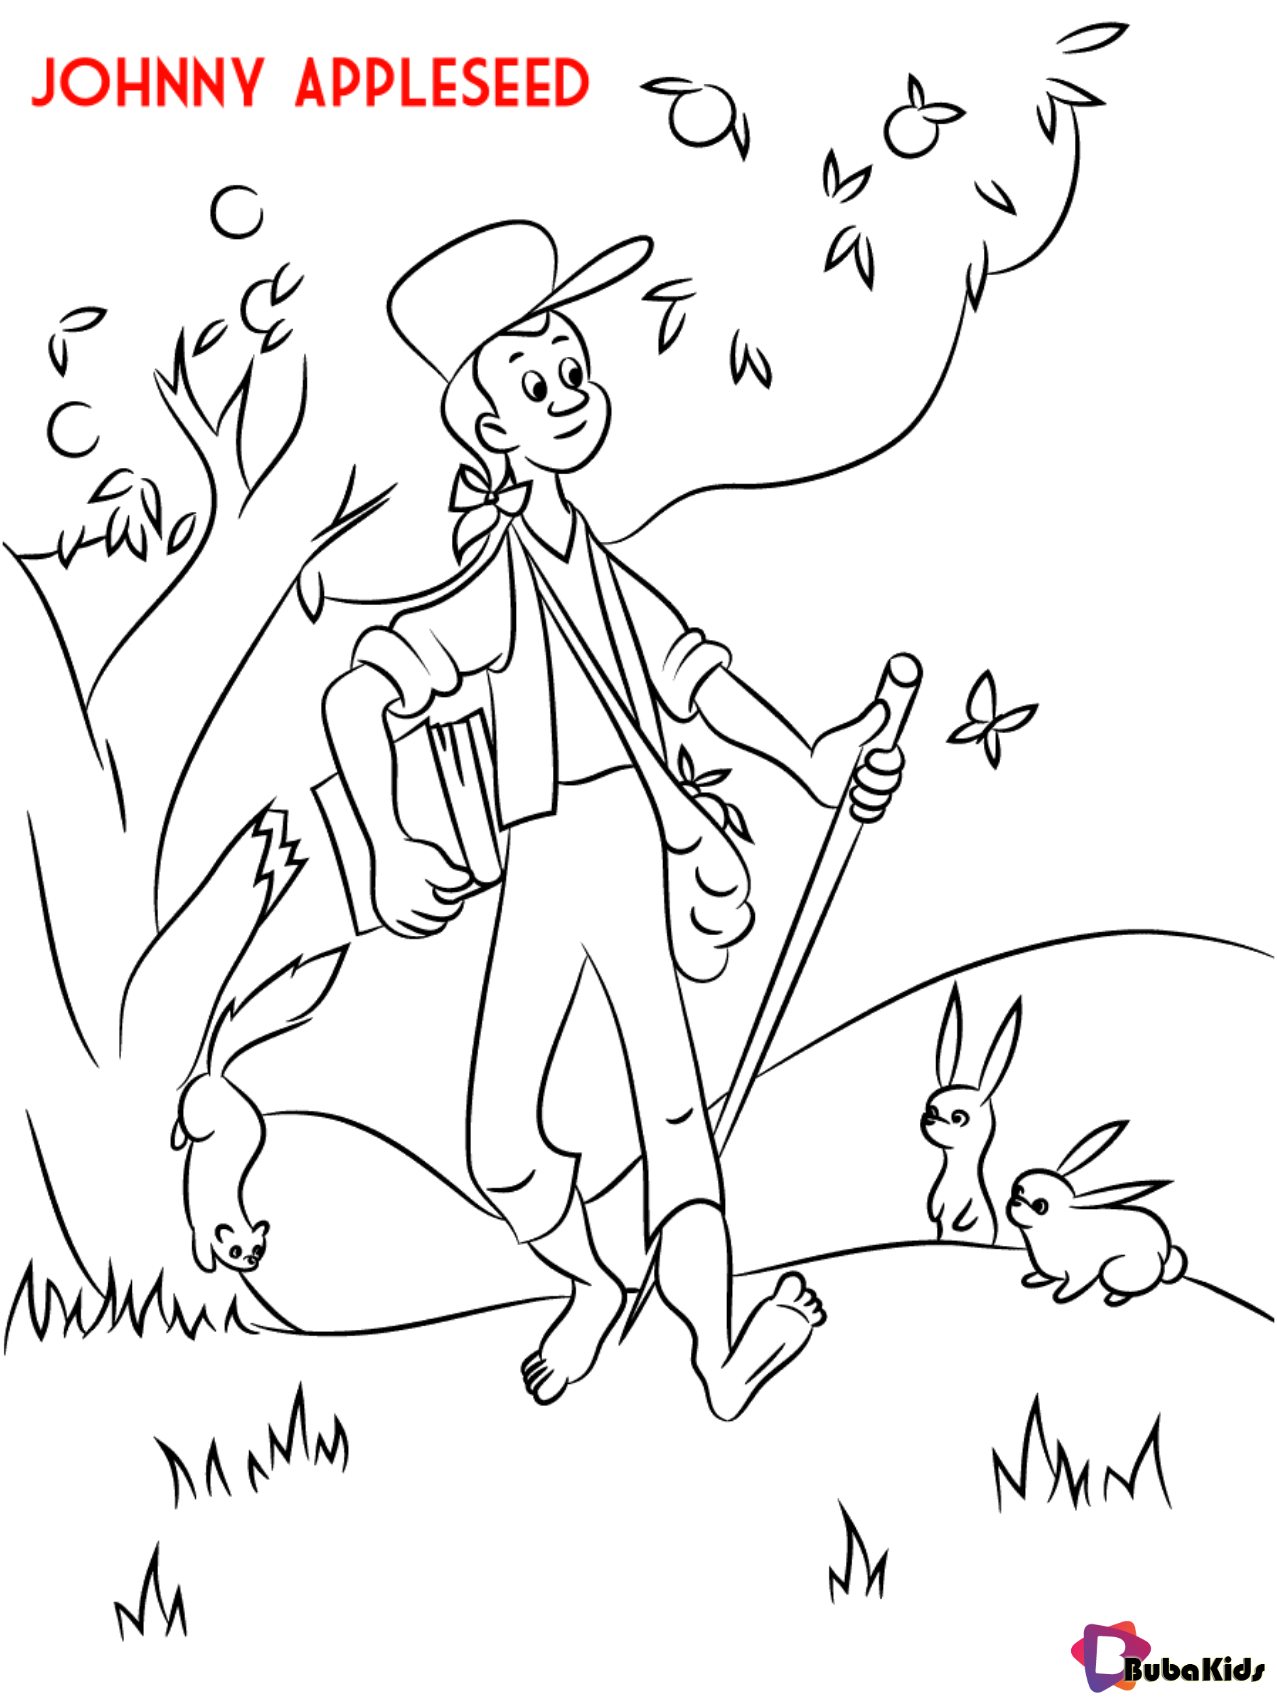 Johnny Appleseed coloring pages for kids Wallpaper